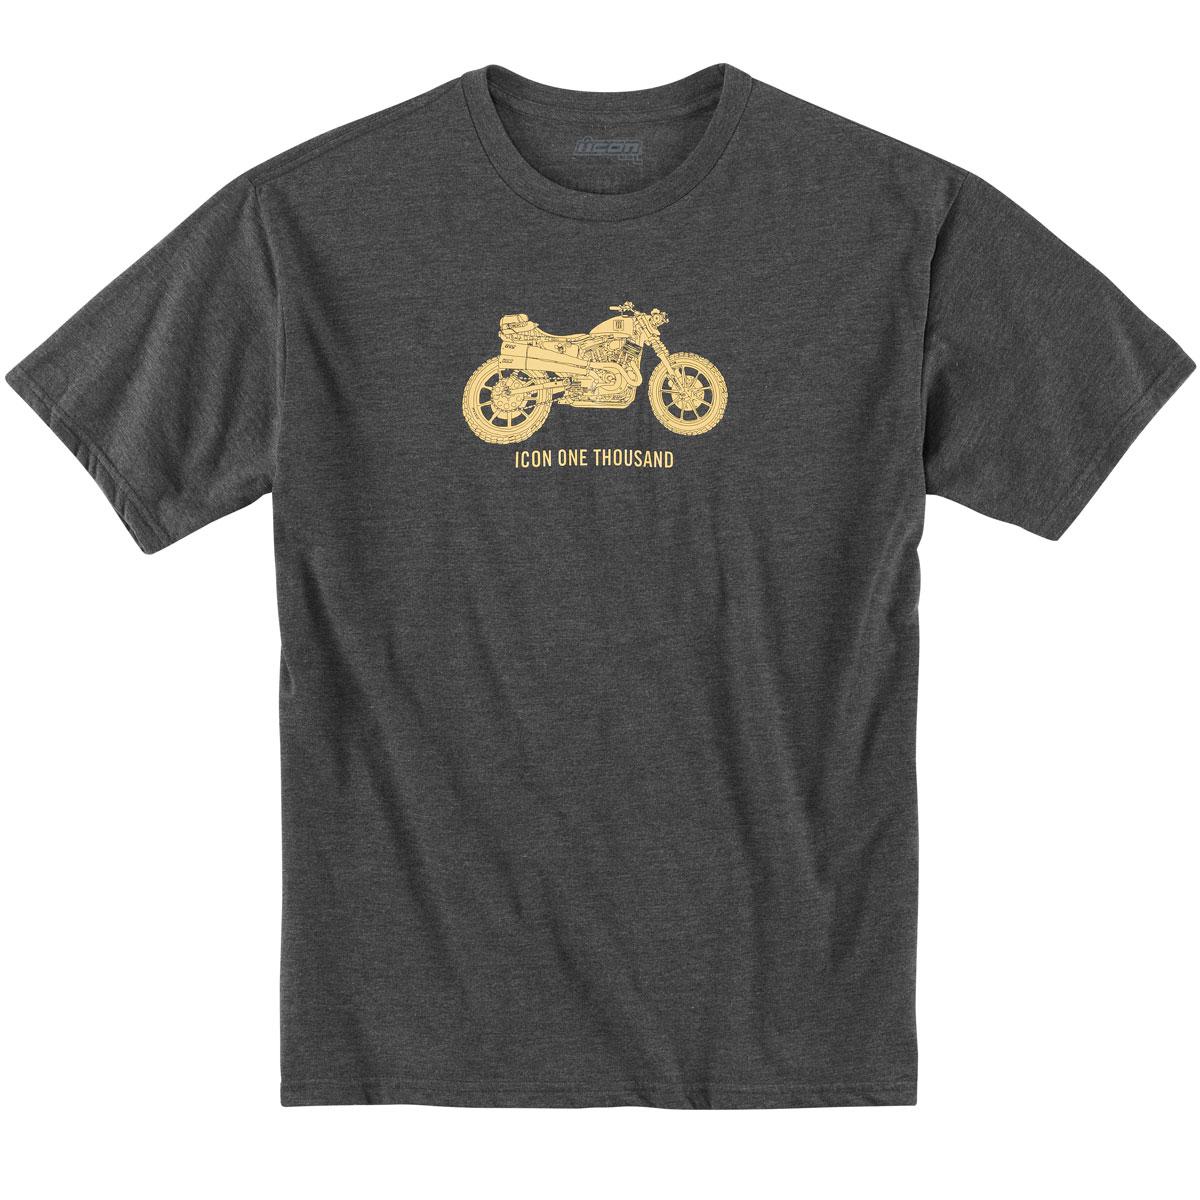 Icon 1000 roach t-shirt motorcycle shirts